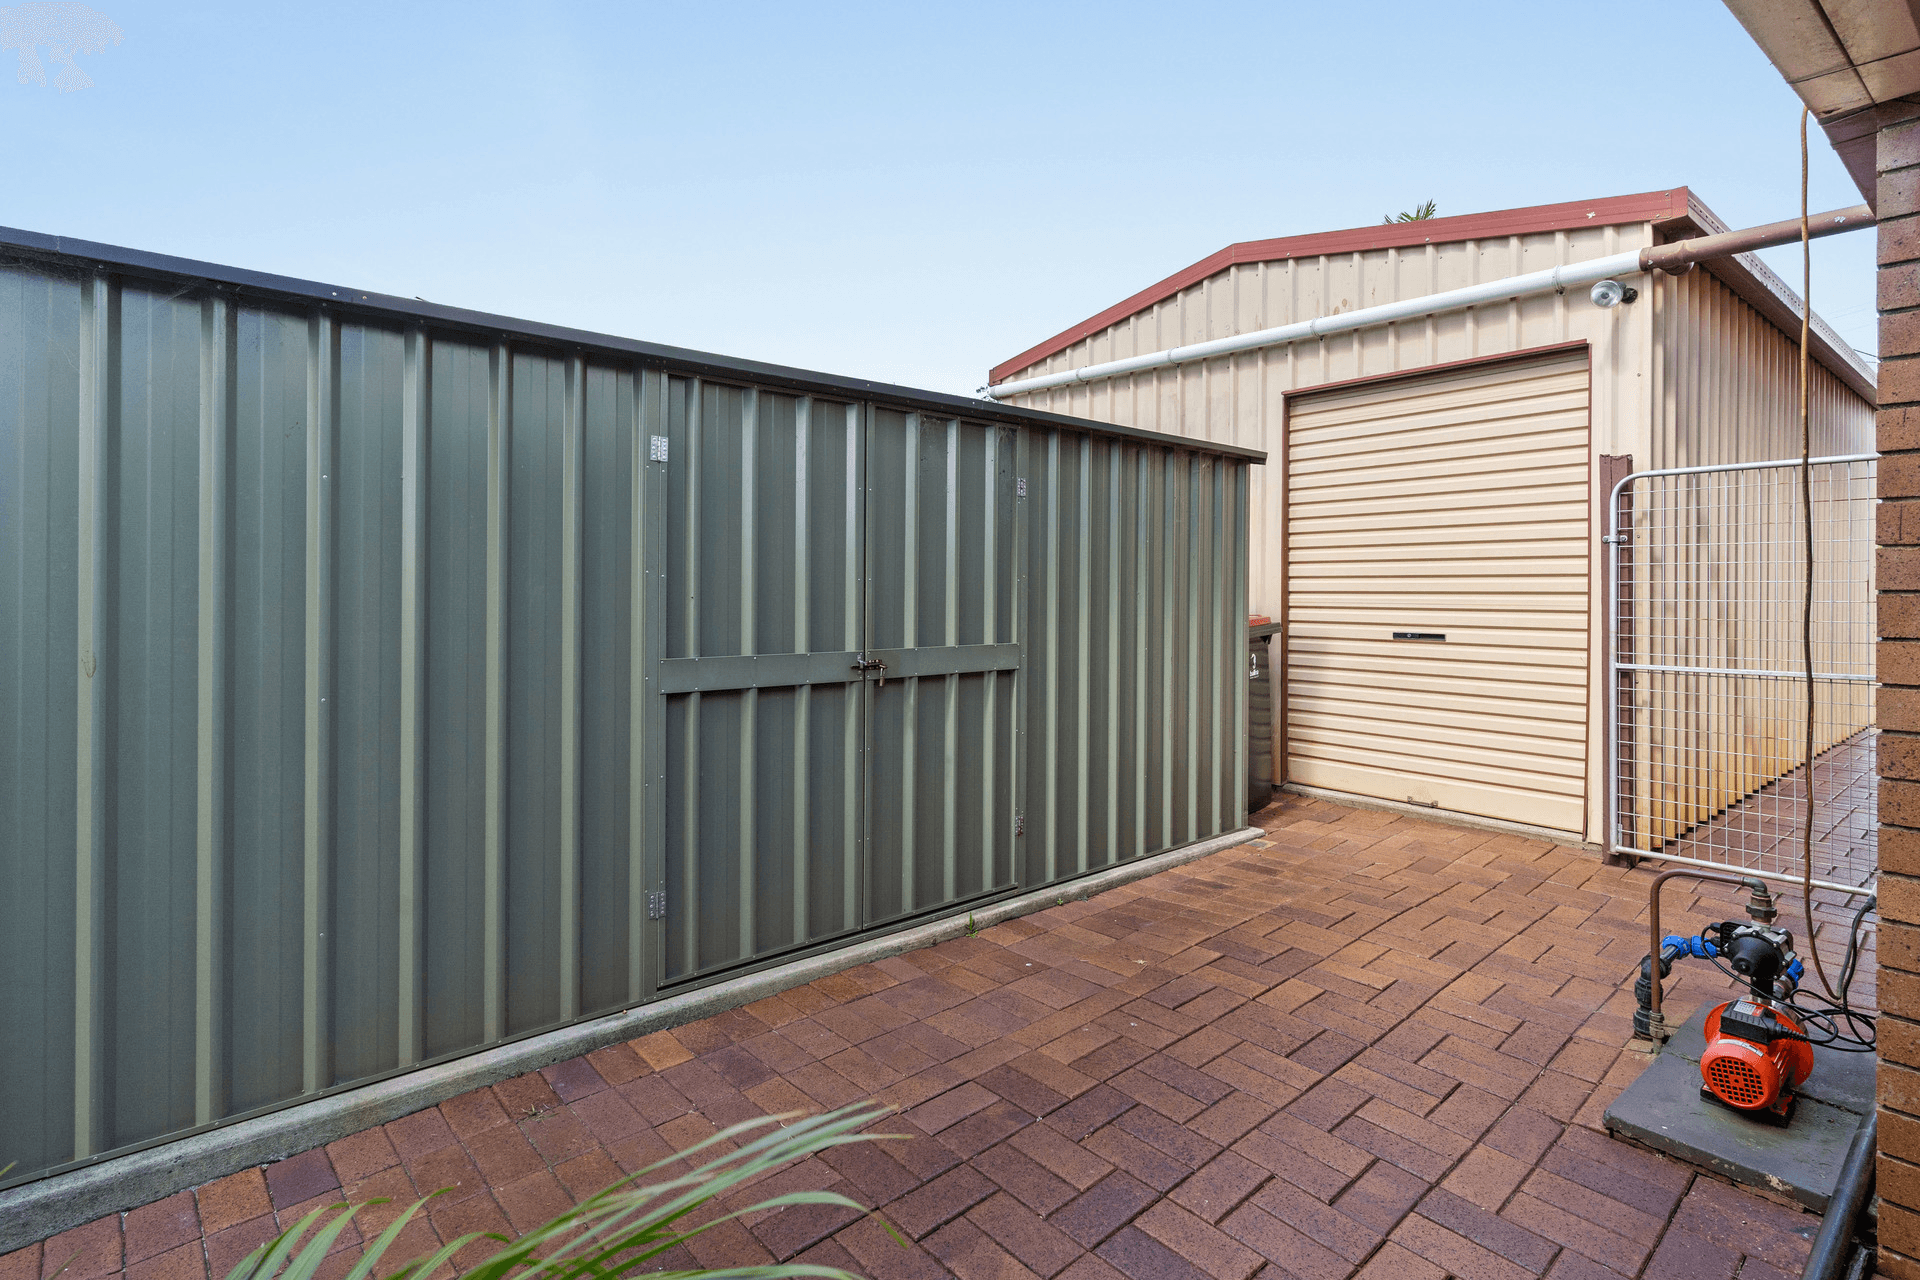 264 River Drive, East Wardell, NSW 2477